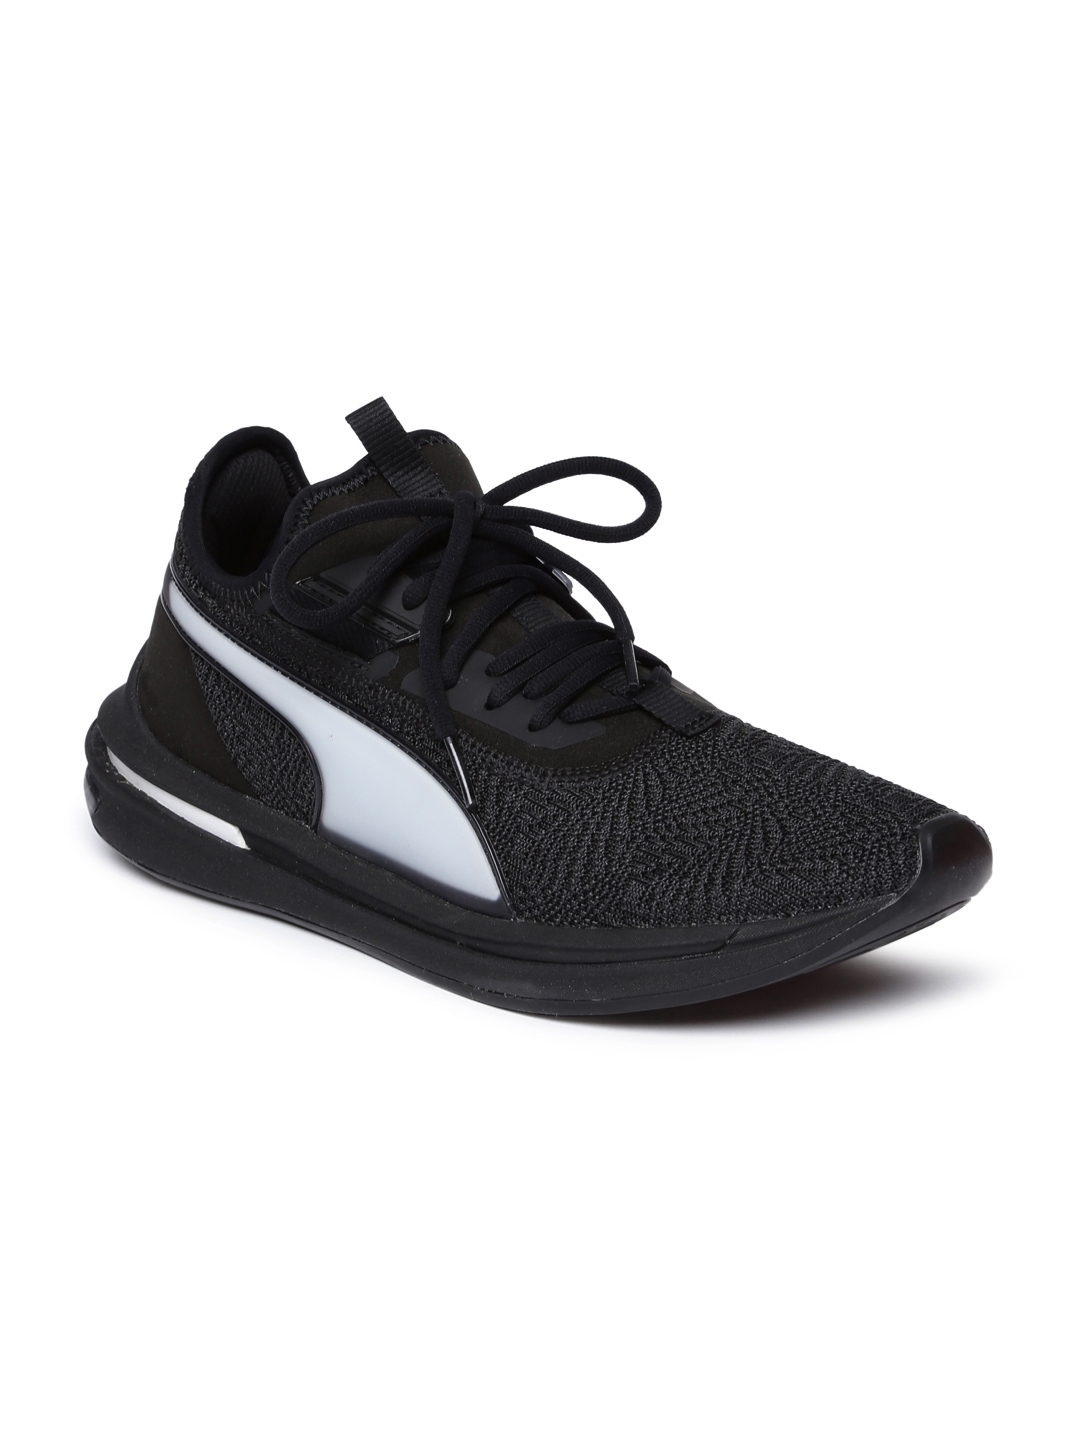 IGNITE Limitless SR 71 Running Shoes 